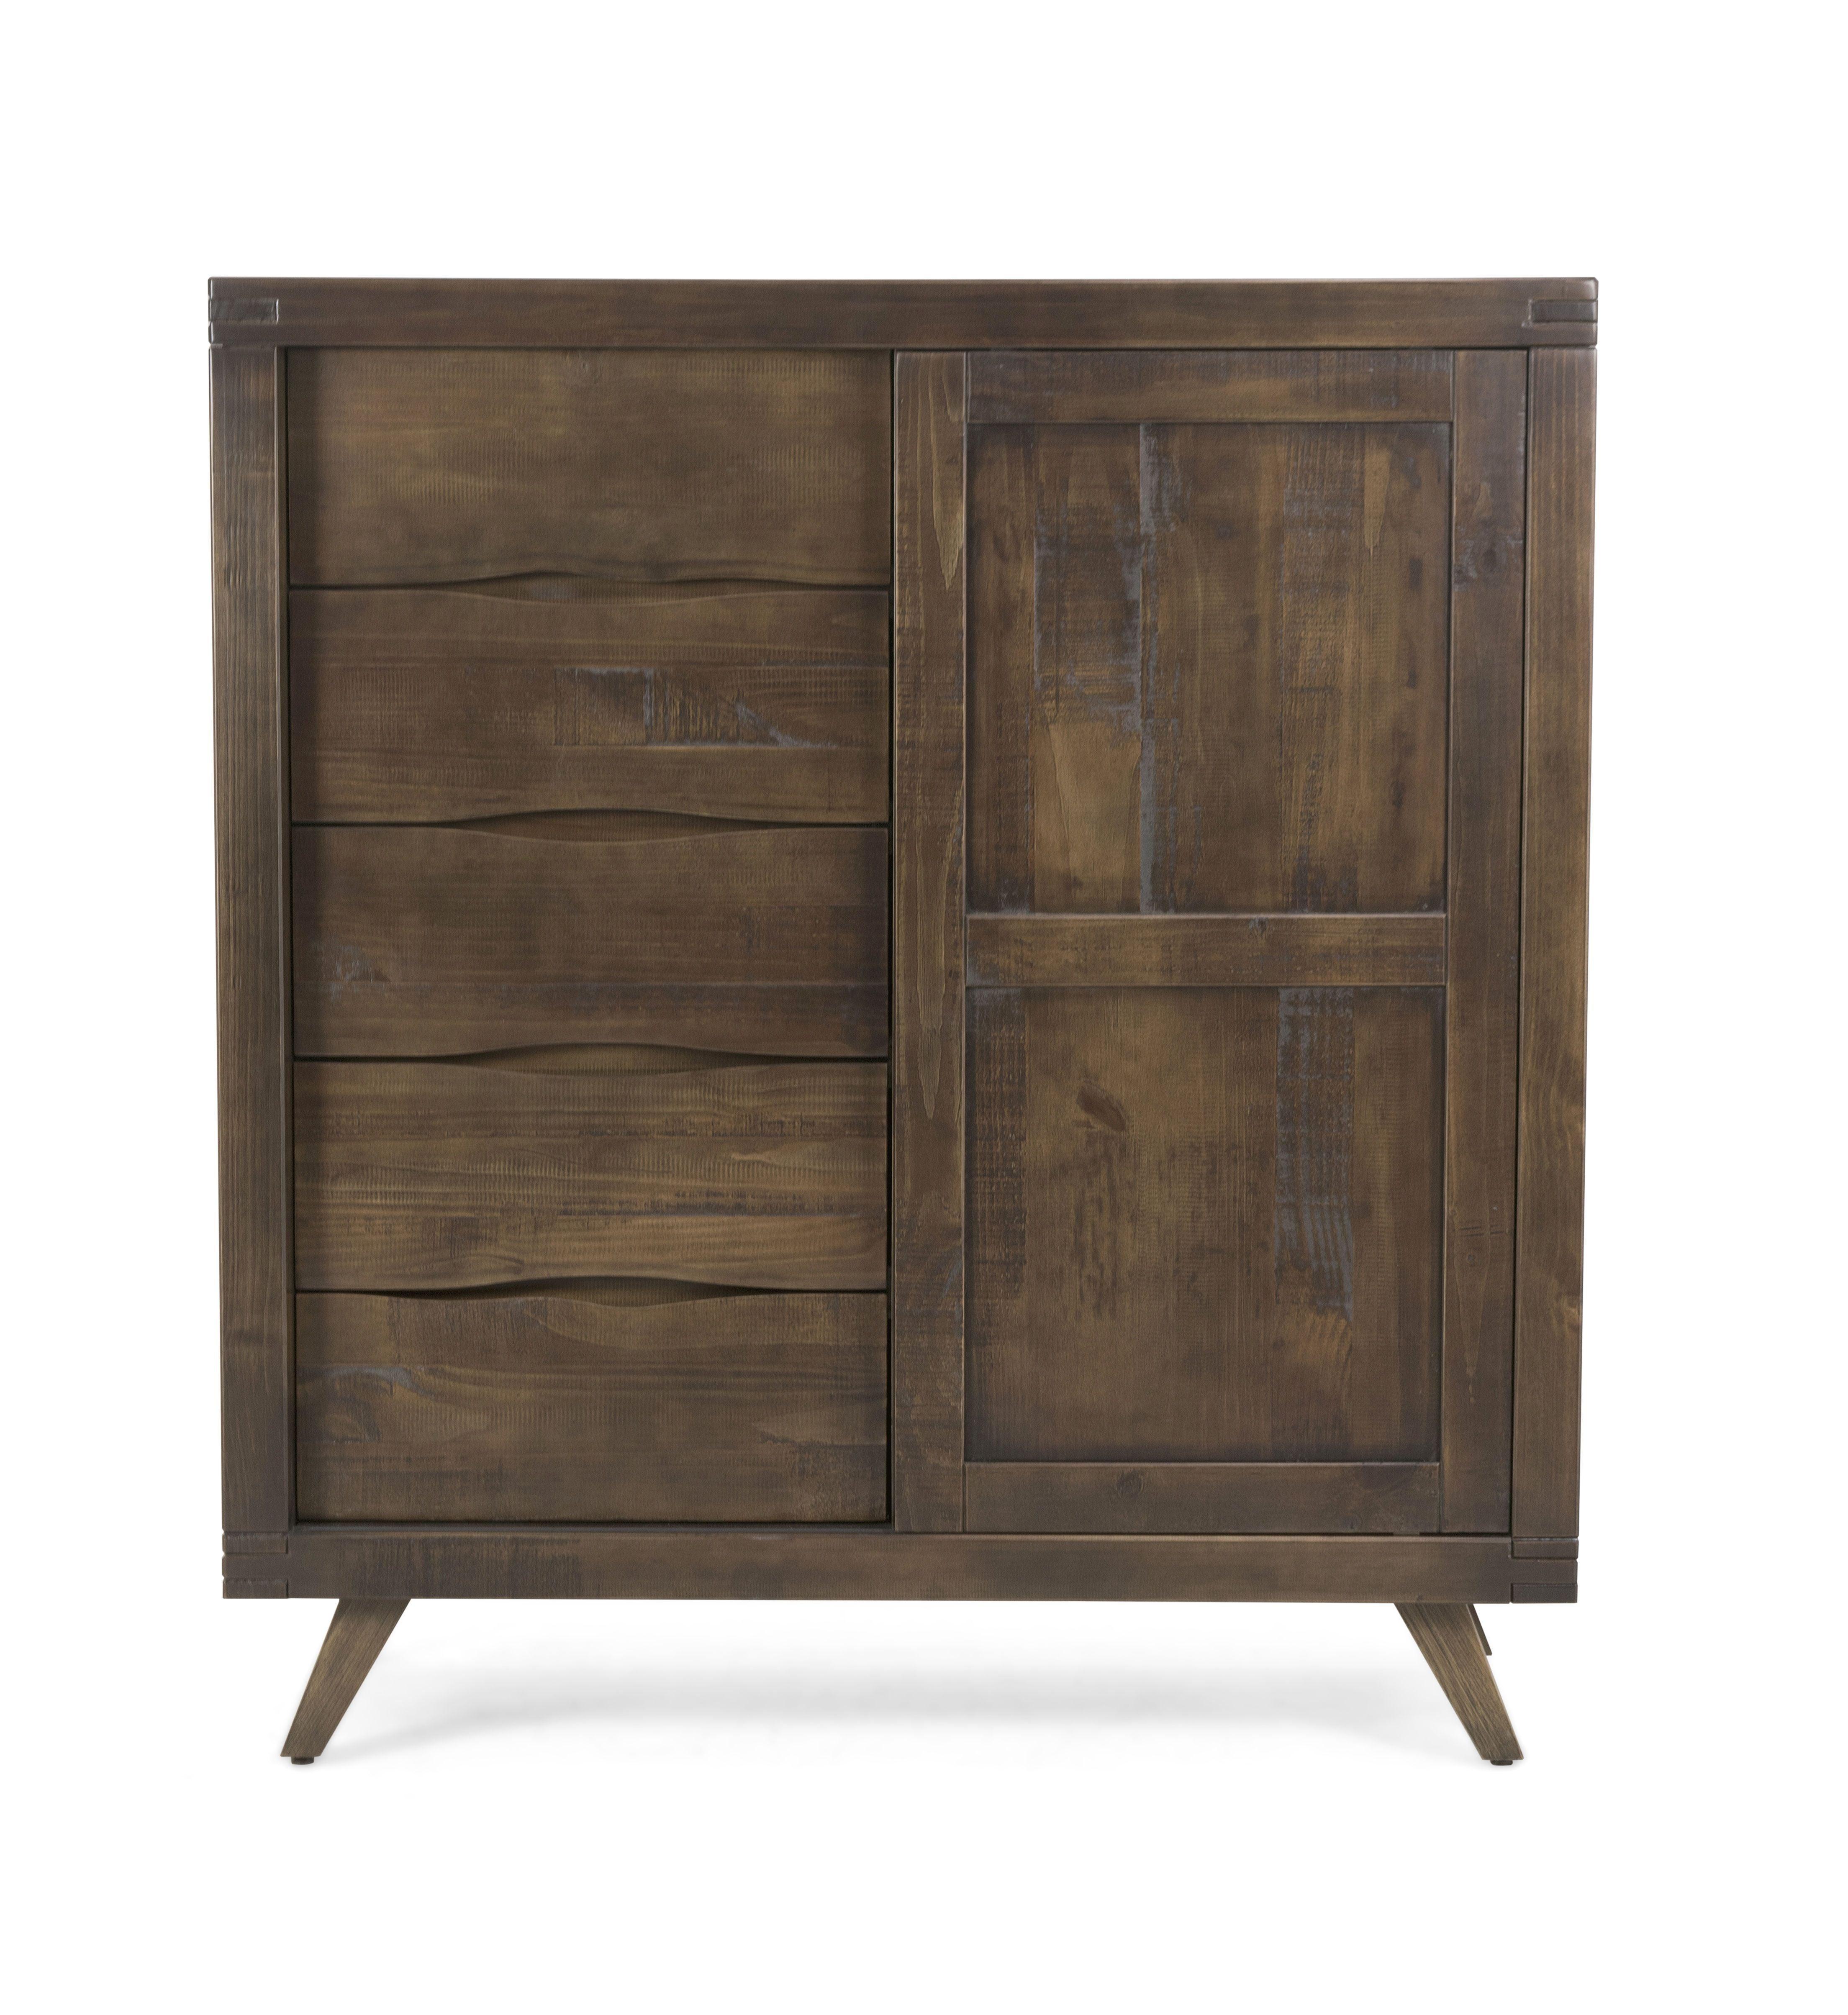 Steve Silver Furniture - Pasco - Gentleman's Chest With Glides - Brown - 5th Avenue Furniture